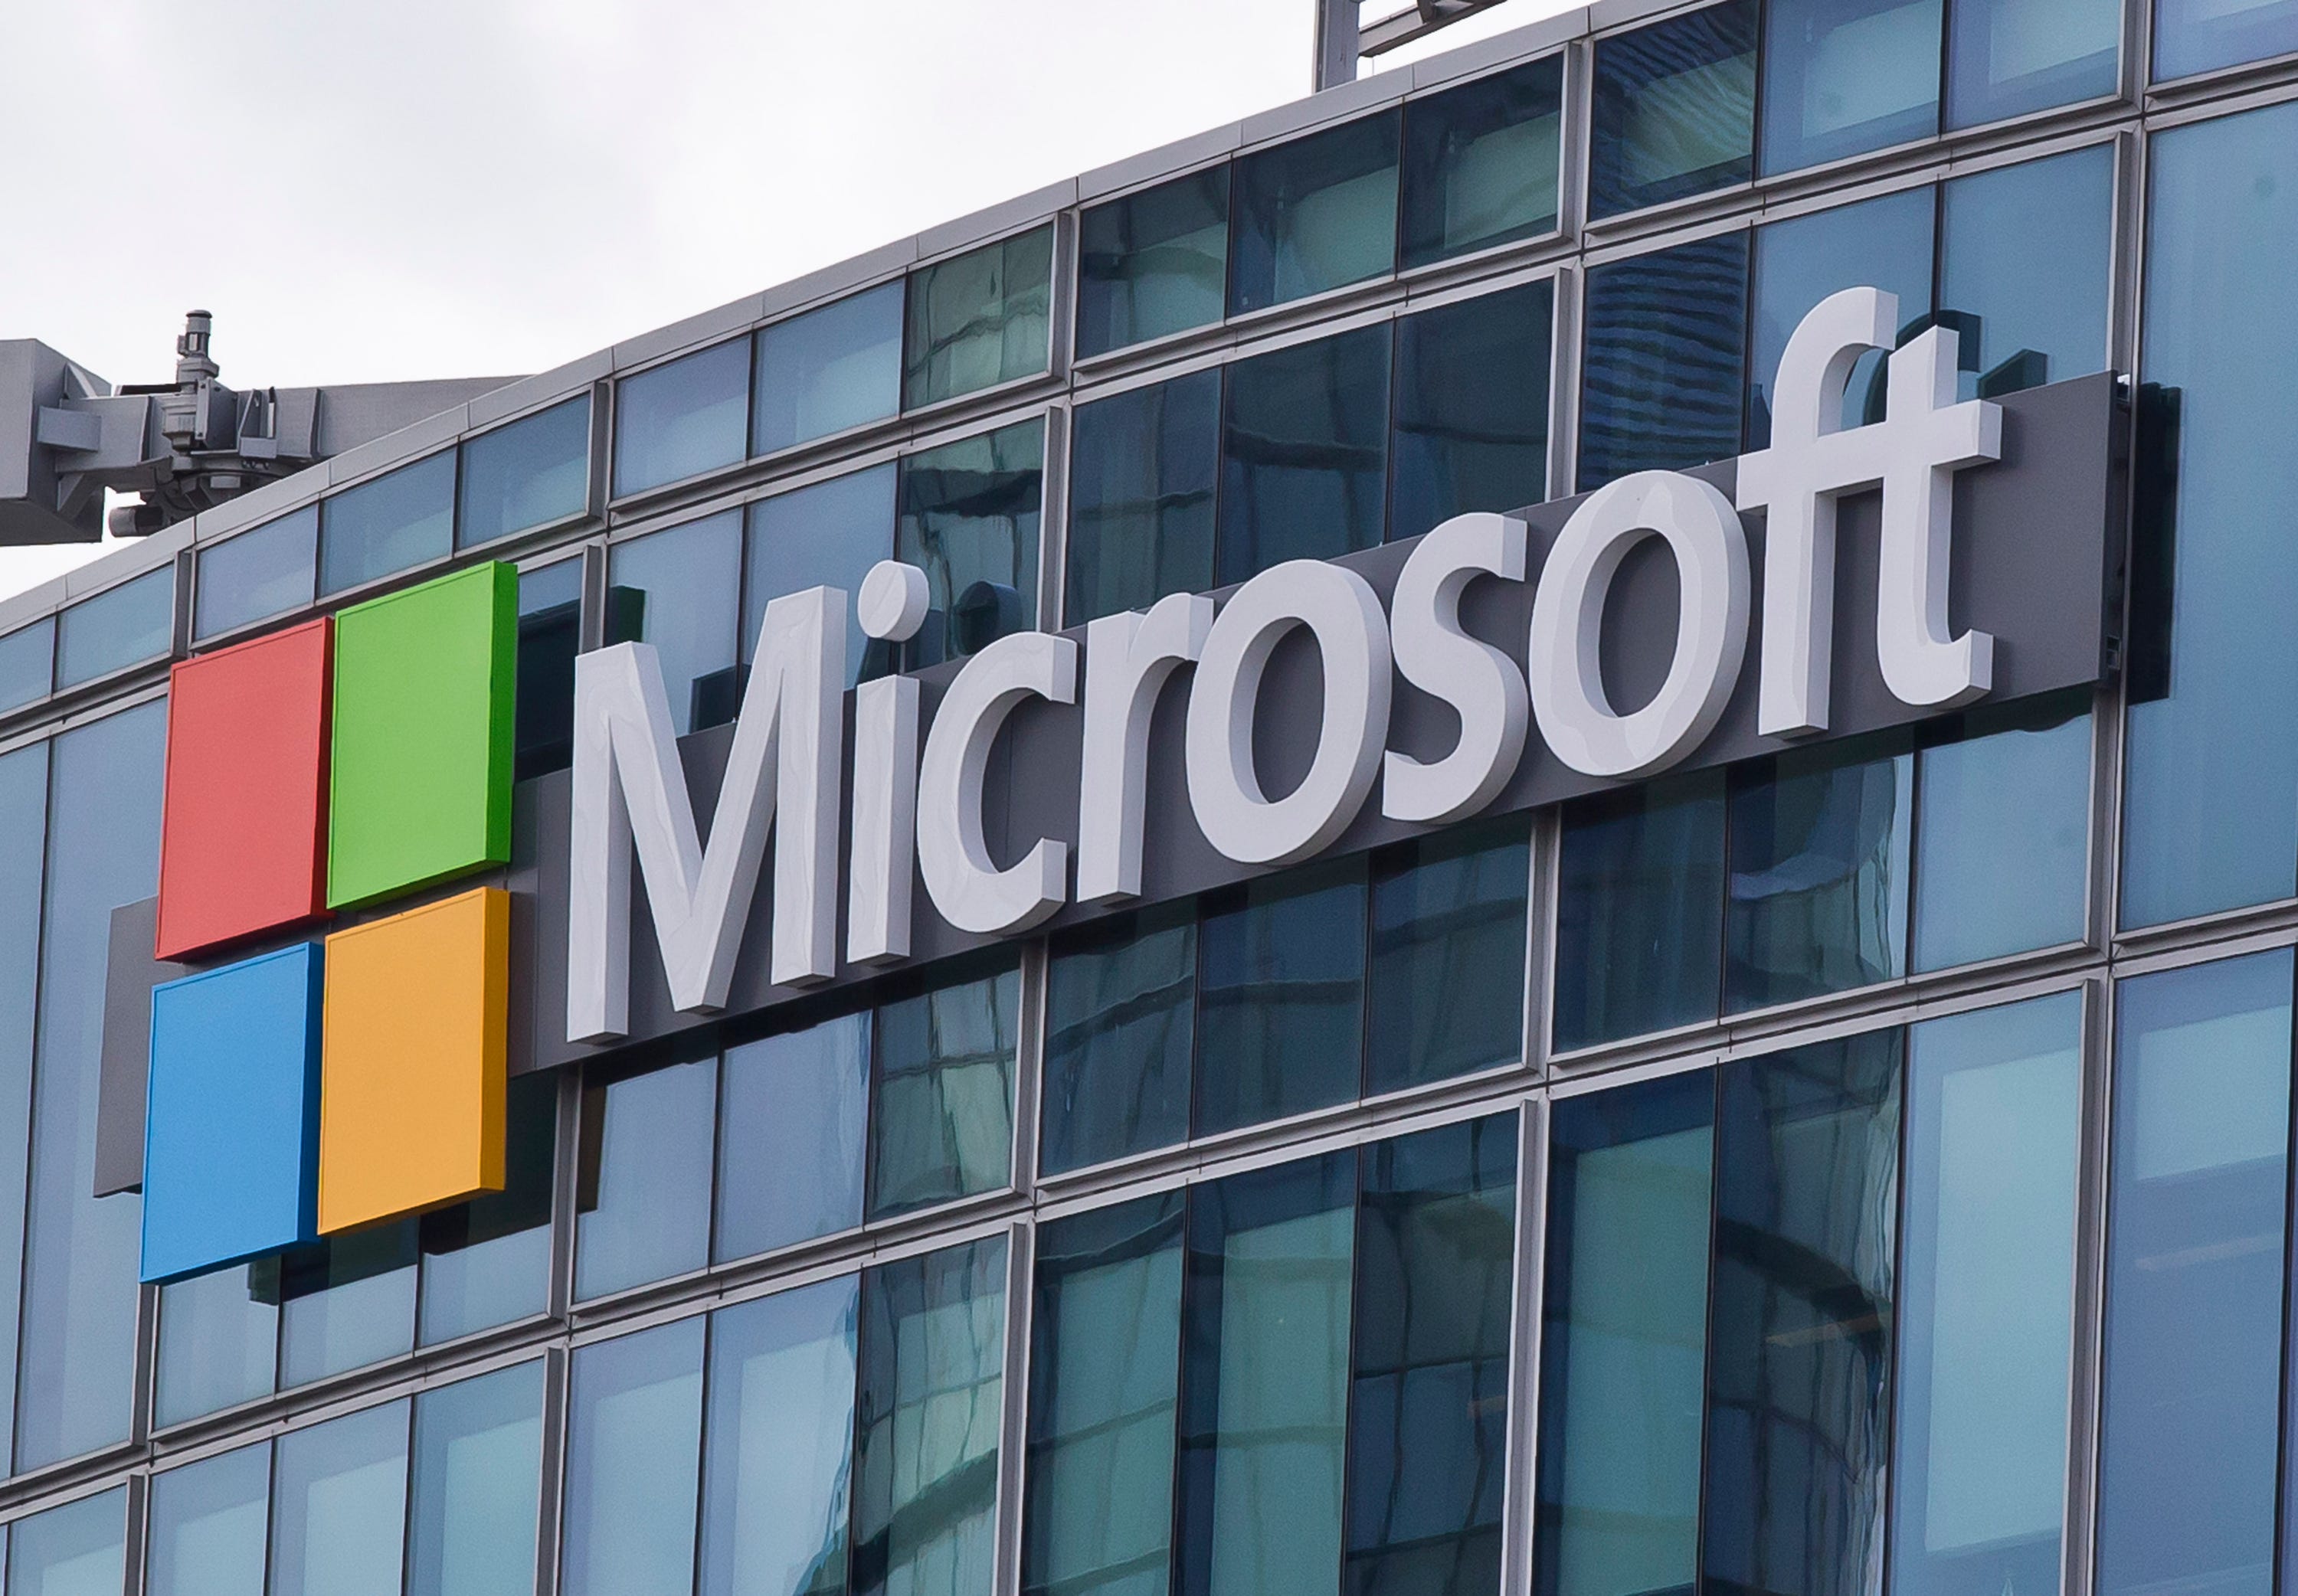 Microsoft Diversity Plan To Hire More Black Employees Probed By Feds